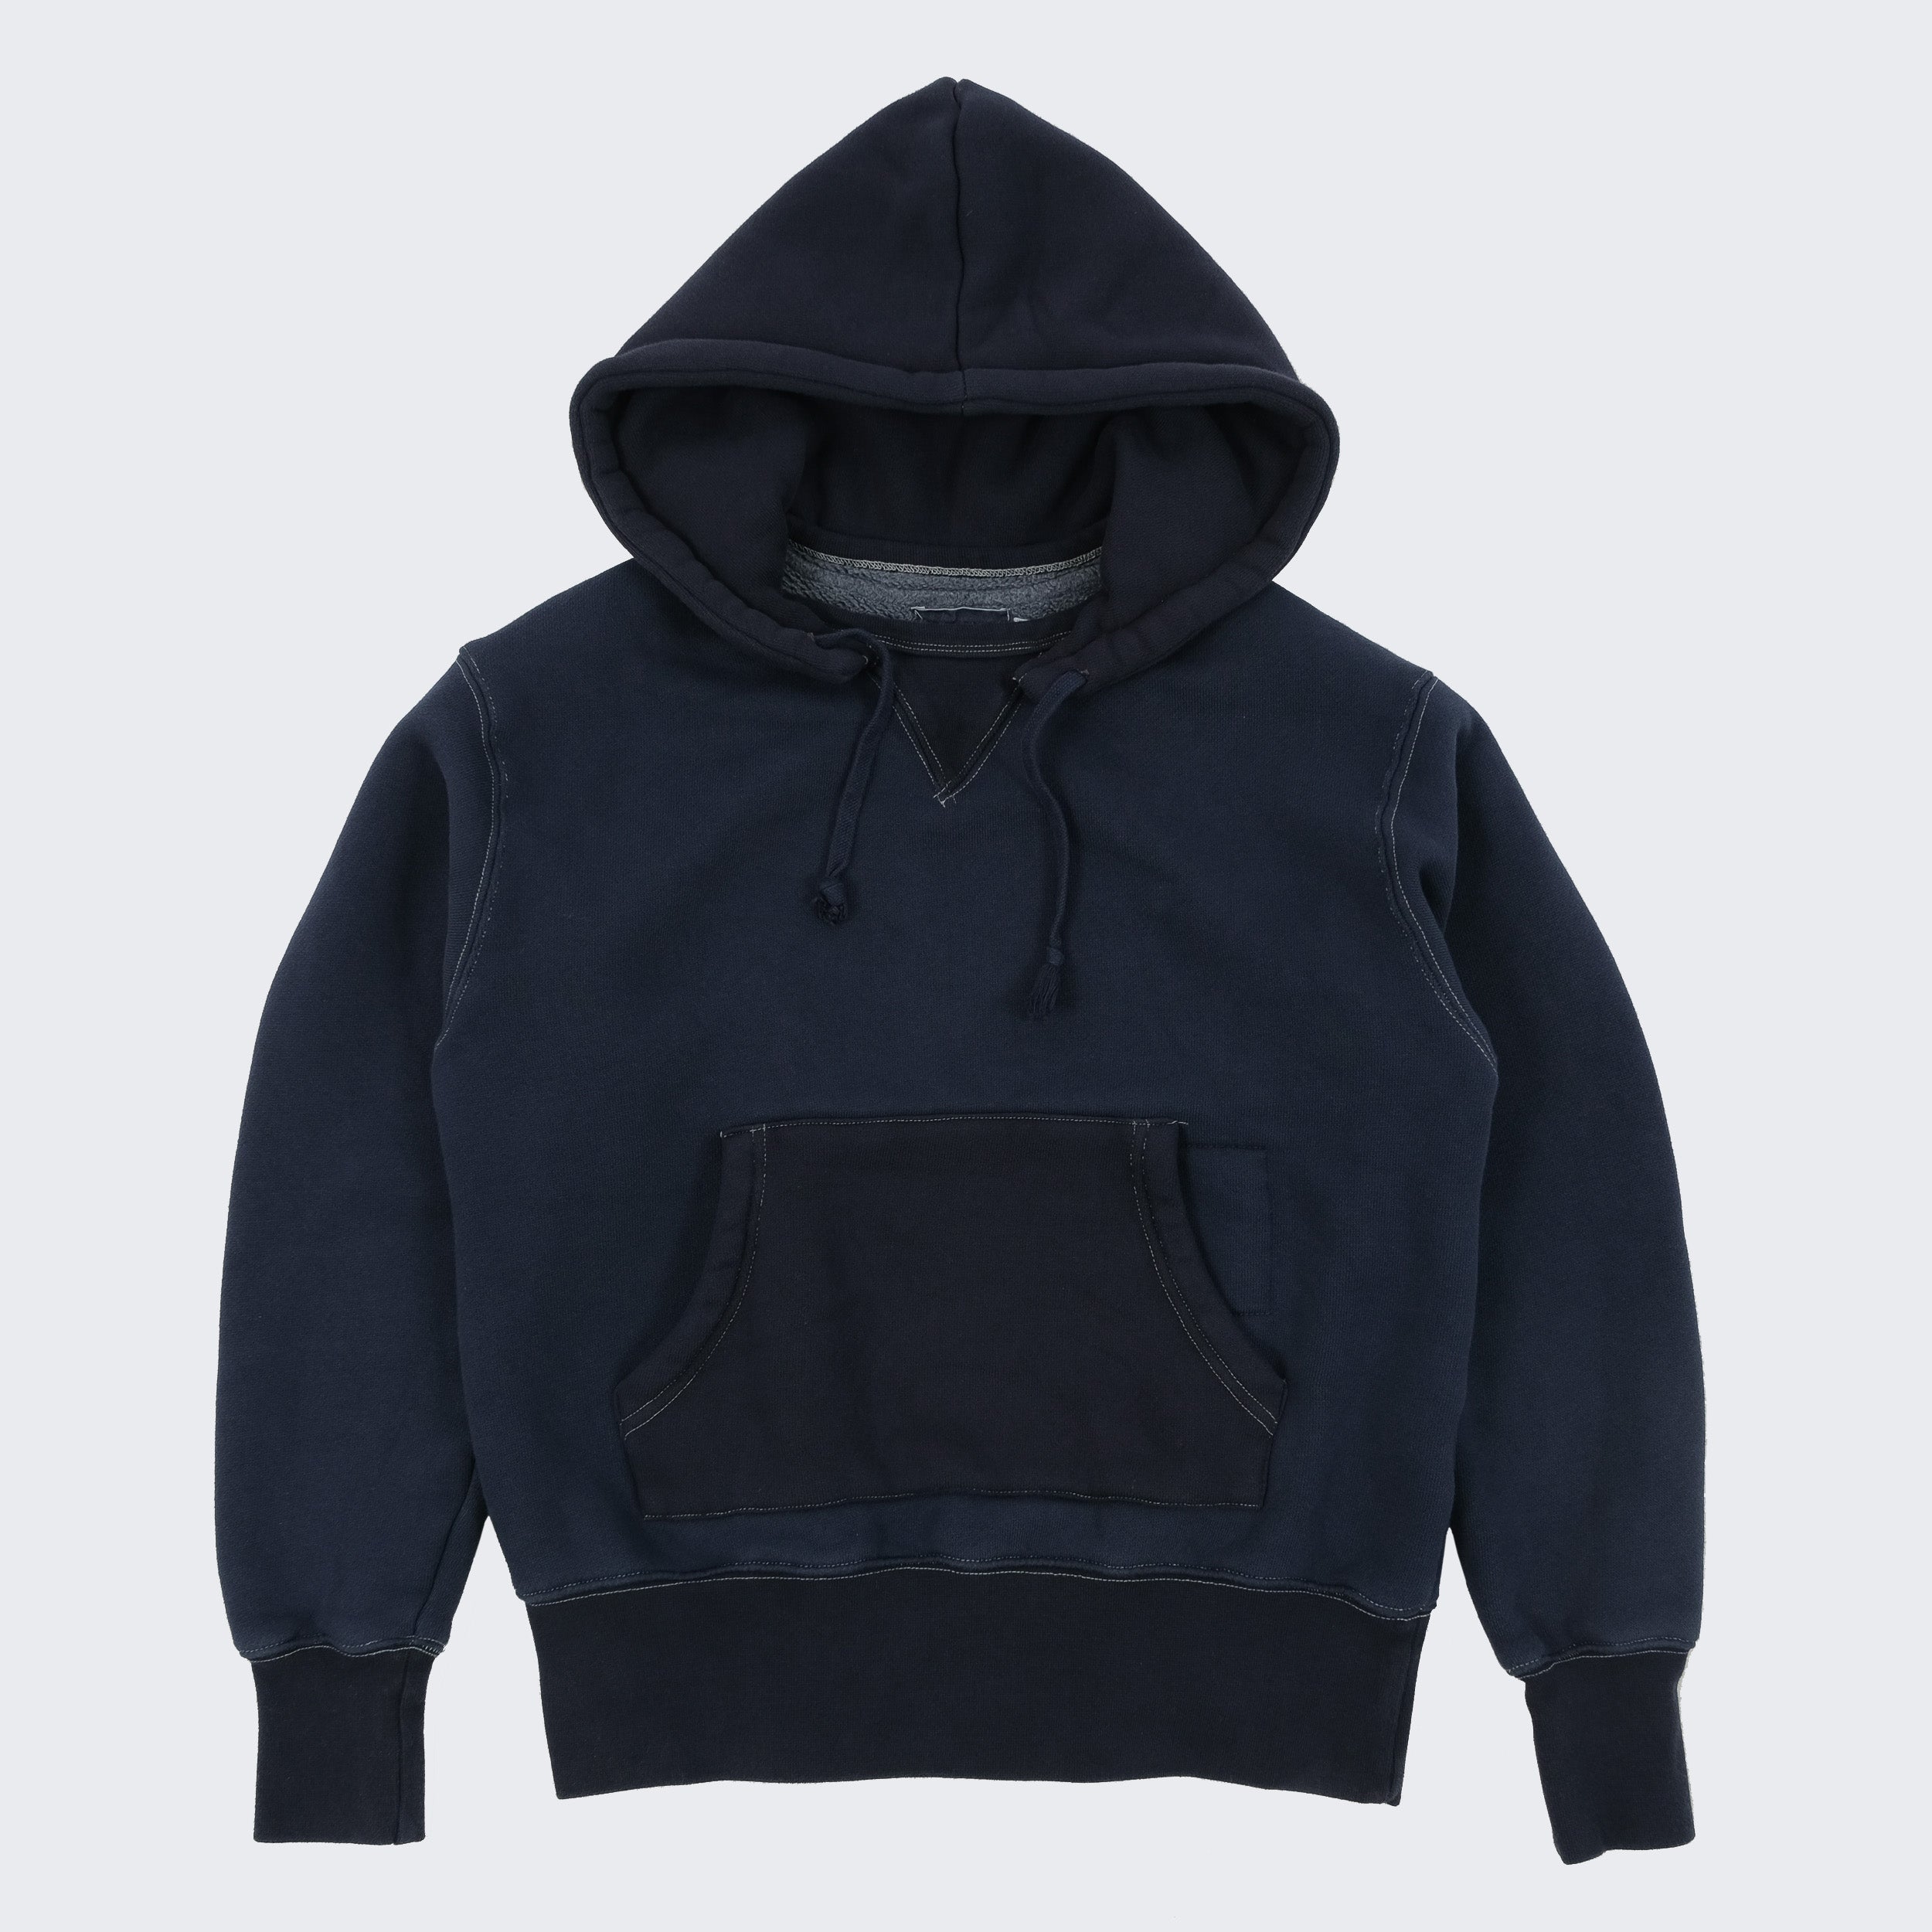 BRUT Special Hoodie Men's sweatshirt - Design from our archives – BRUT  Clothing